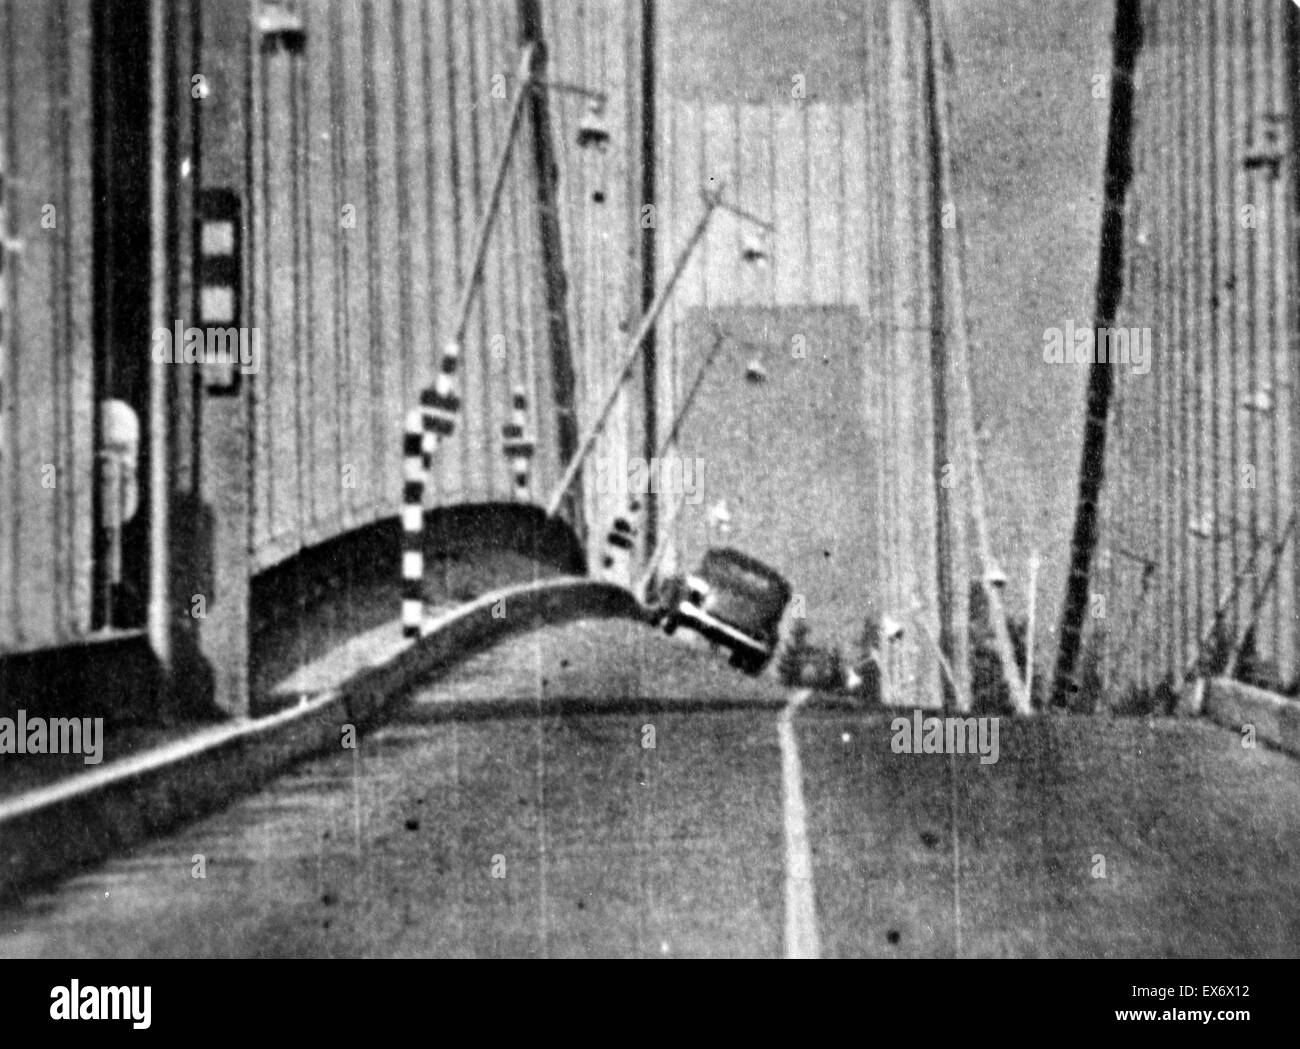 Photographic print of the original Tacoma Narrows Bridge before it's wind induced collapse. The print depicts the physical phenomenon known as aerolastic flutter, which is the dynamic instability of an elastic structure in a fluid flow, caused by positive Stock Photo